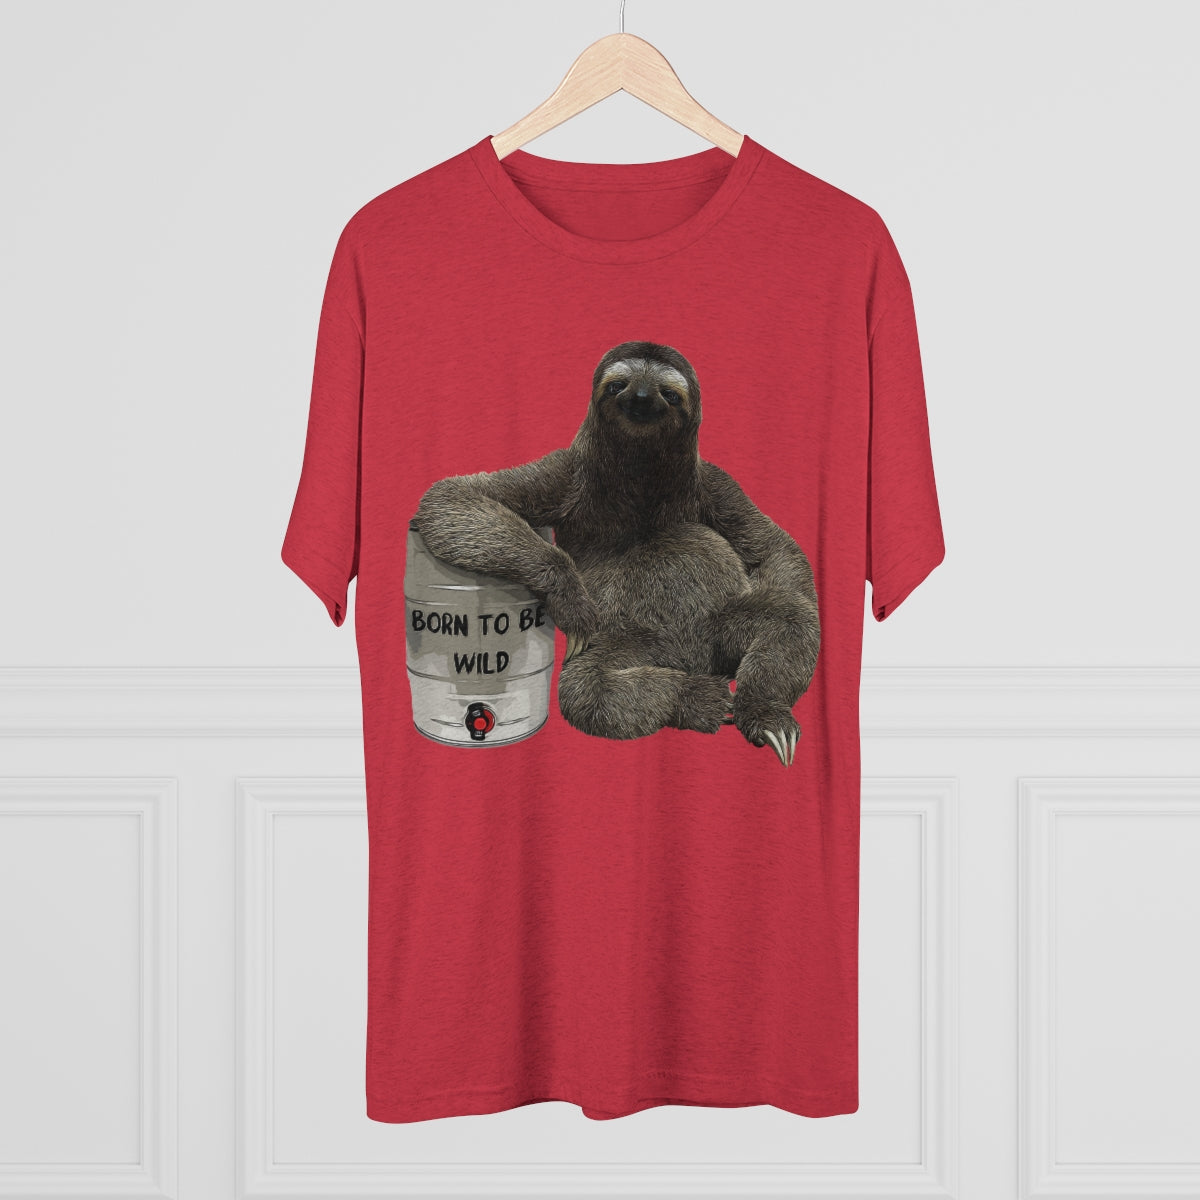 Born to be wild- Party Sloth with beer keg- Men